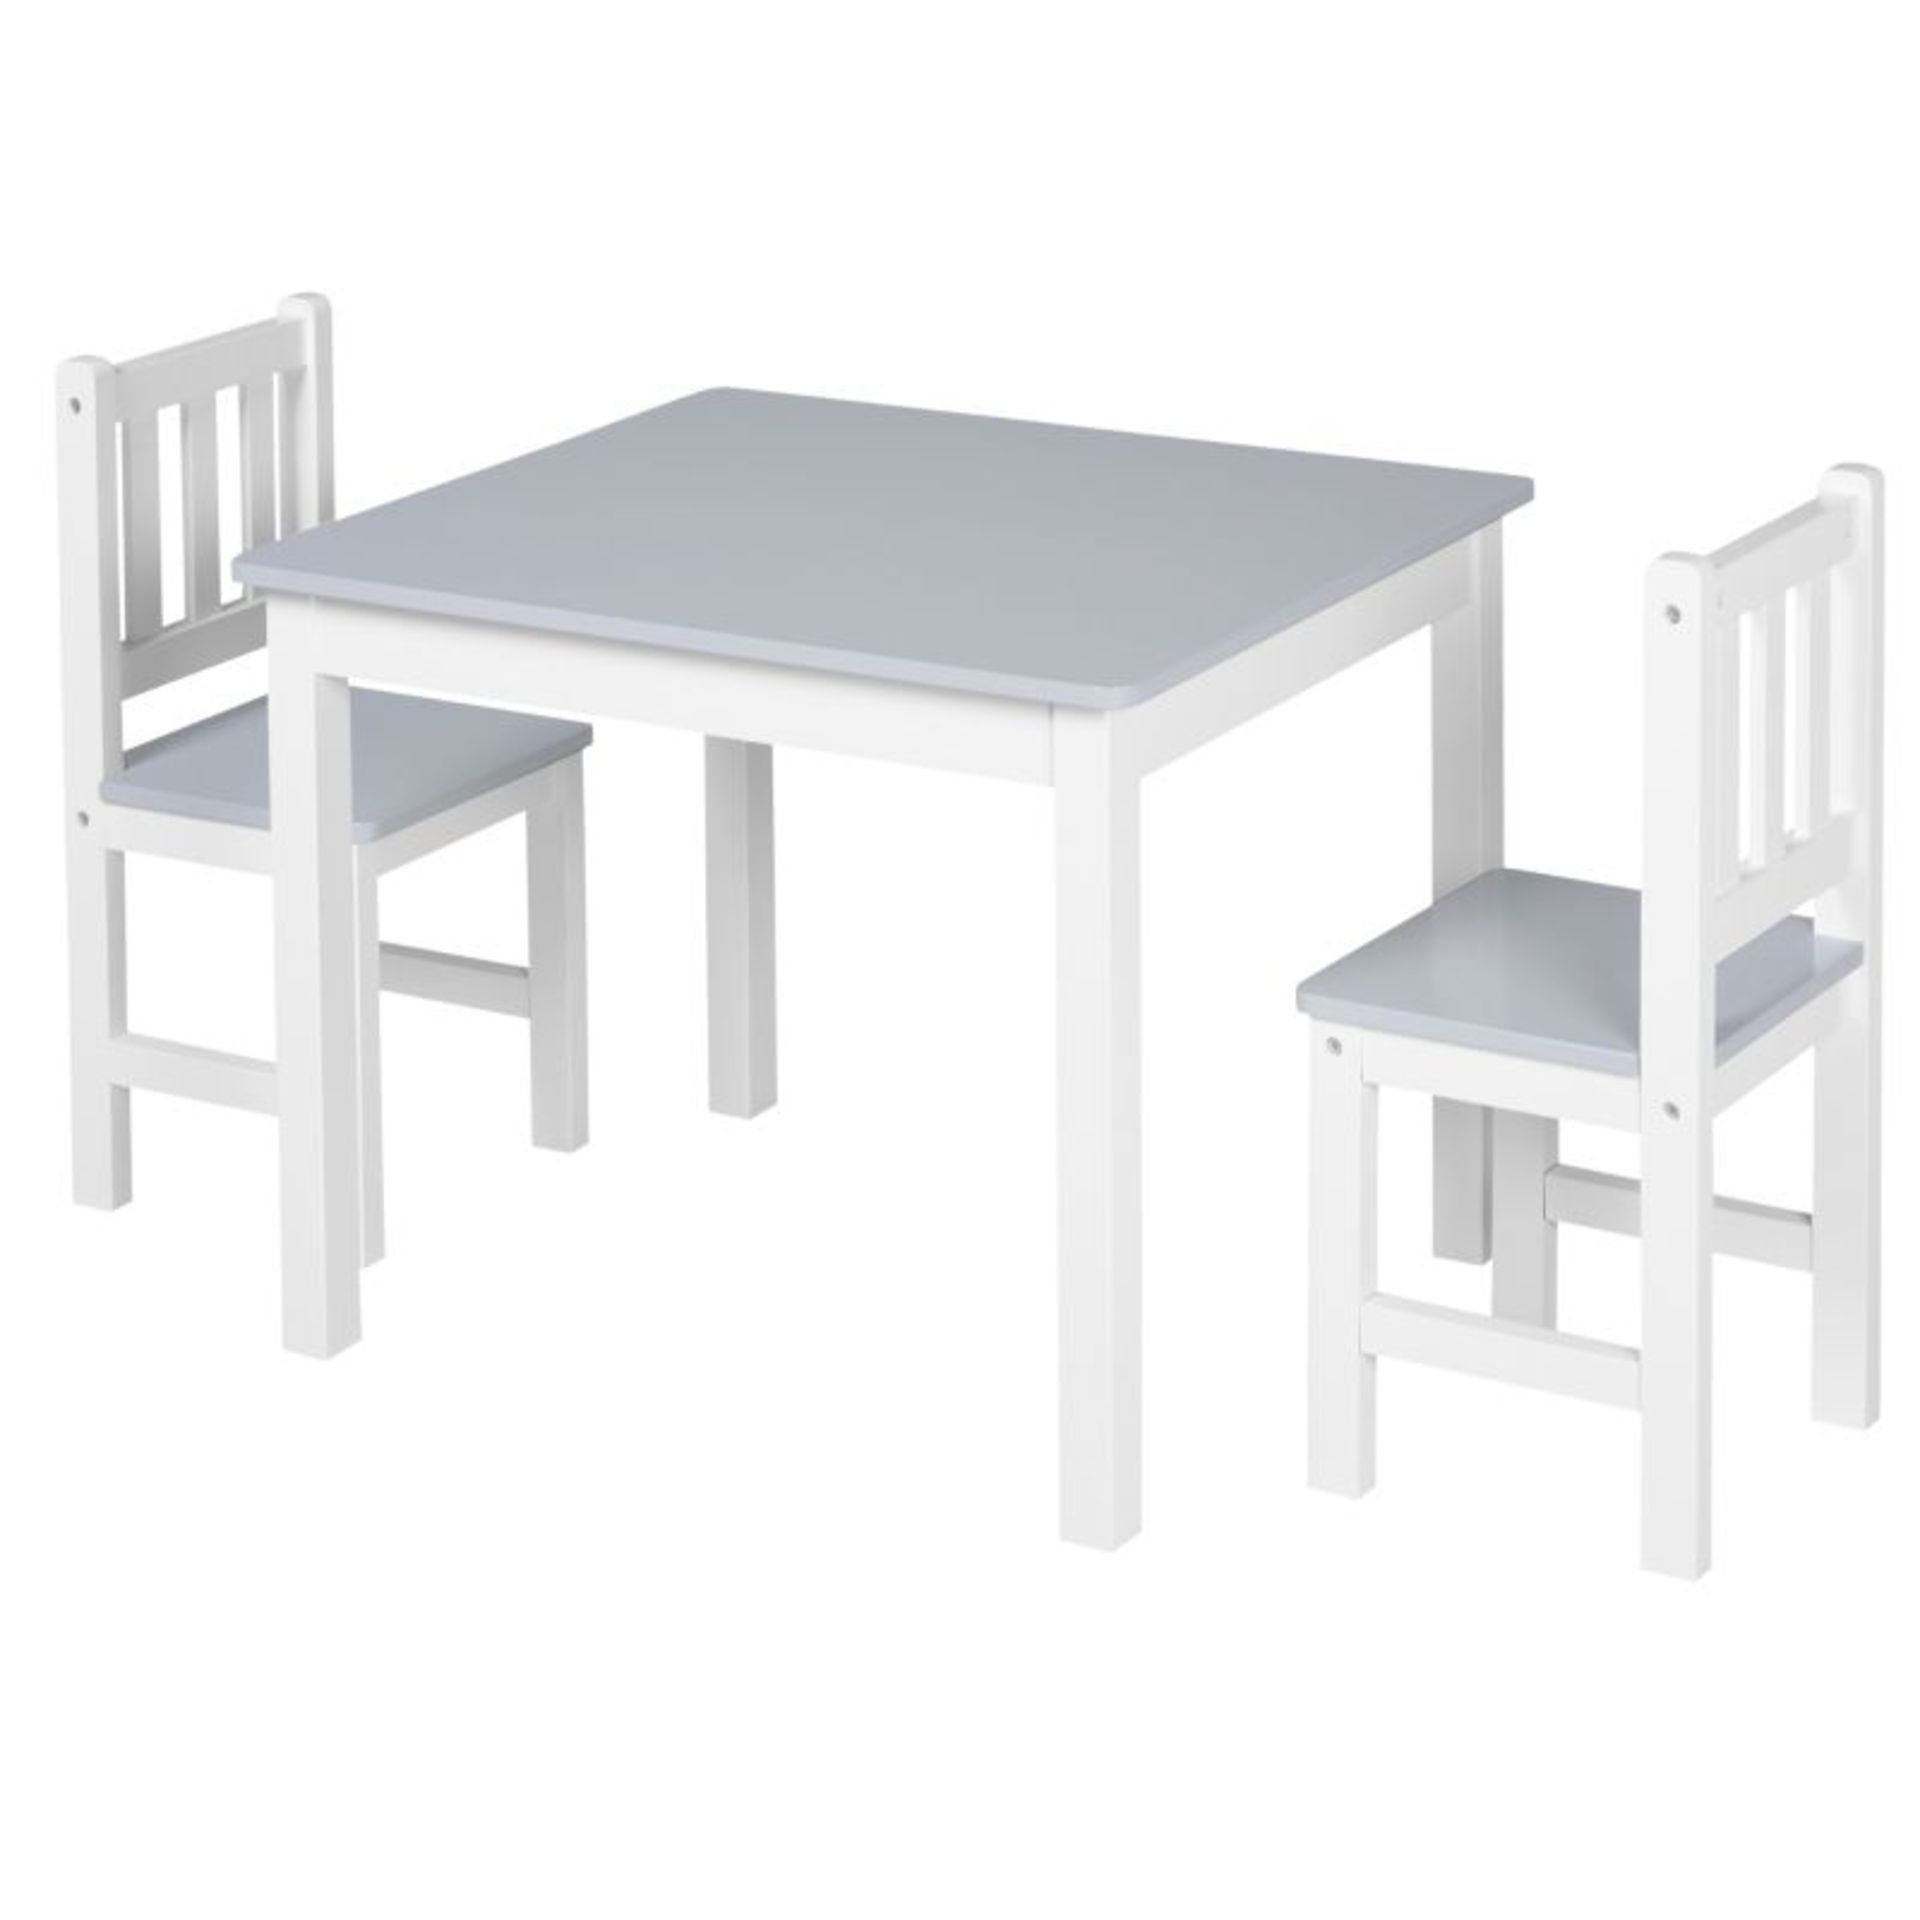 HOMCOM Kids Table and Chair Set 3 Pieces Toddler Preschoolers Desk with 2 Chairs for Indoor Study